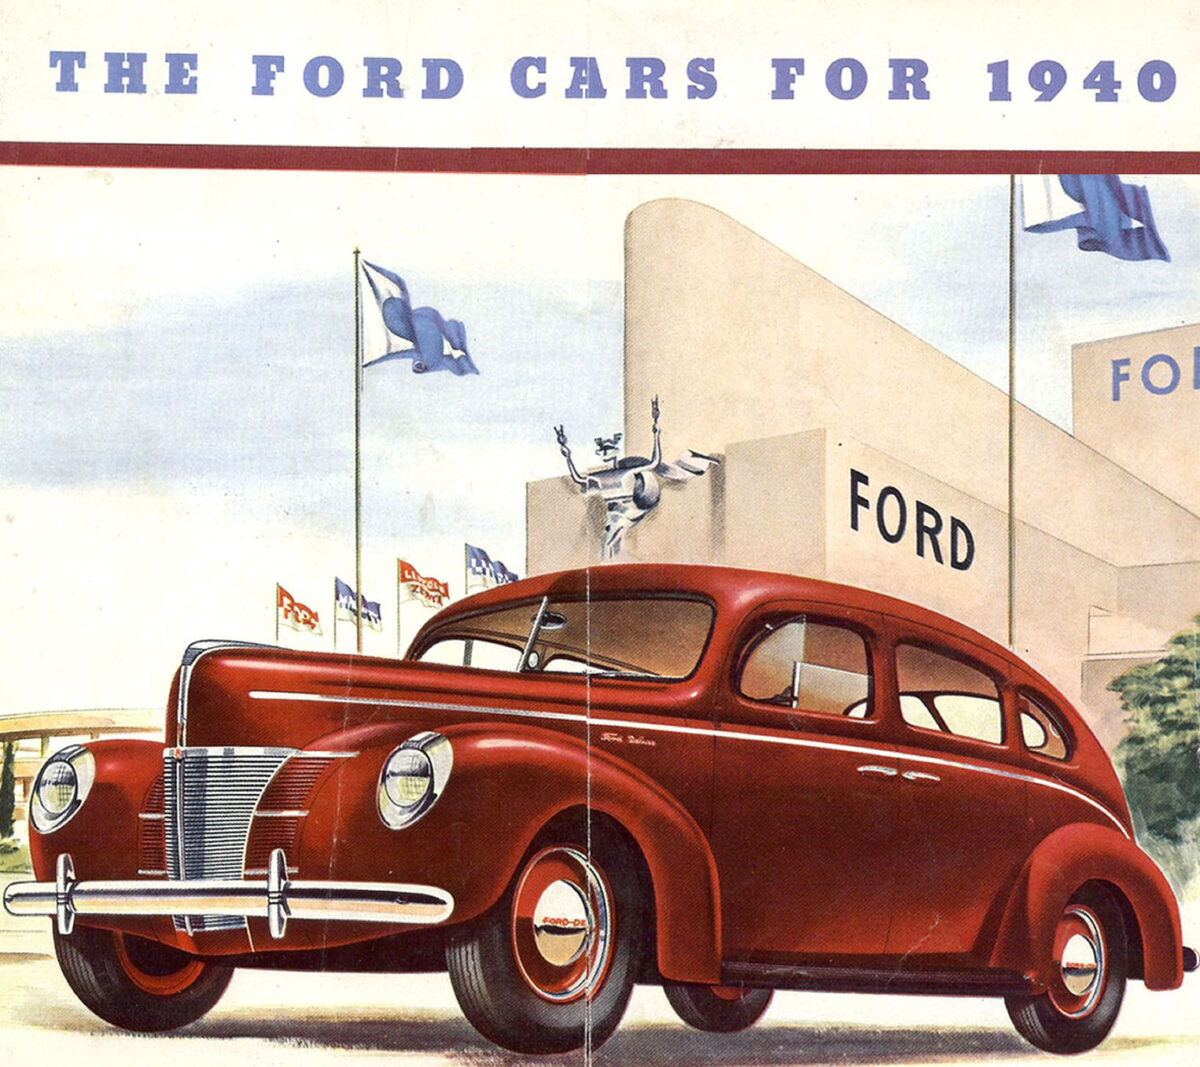 1940 The Ford Cars - The Flat-Spot